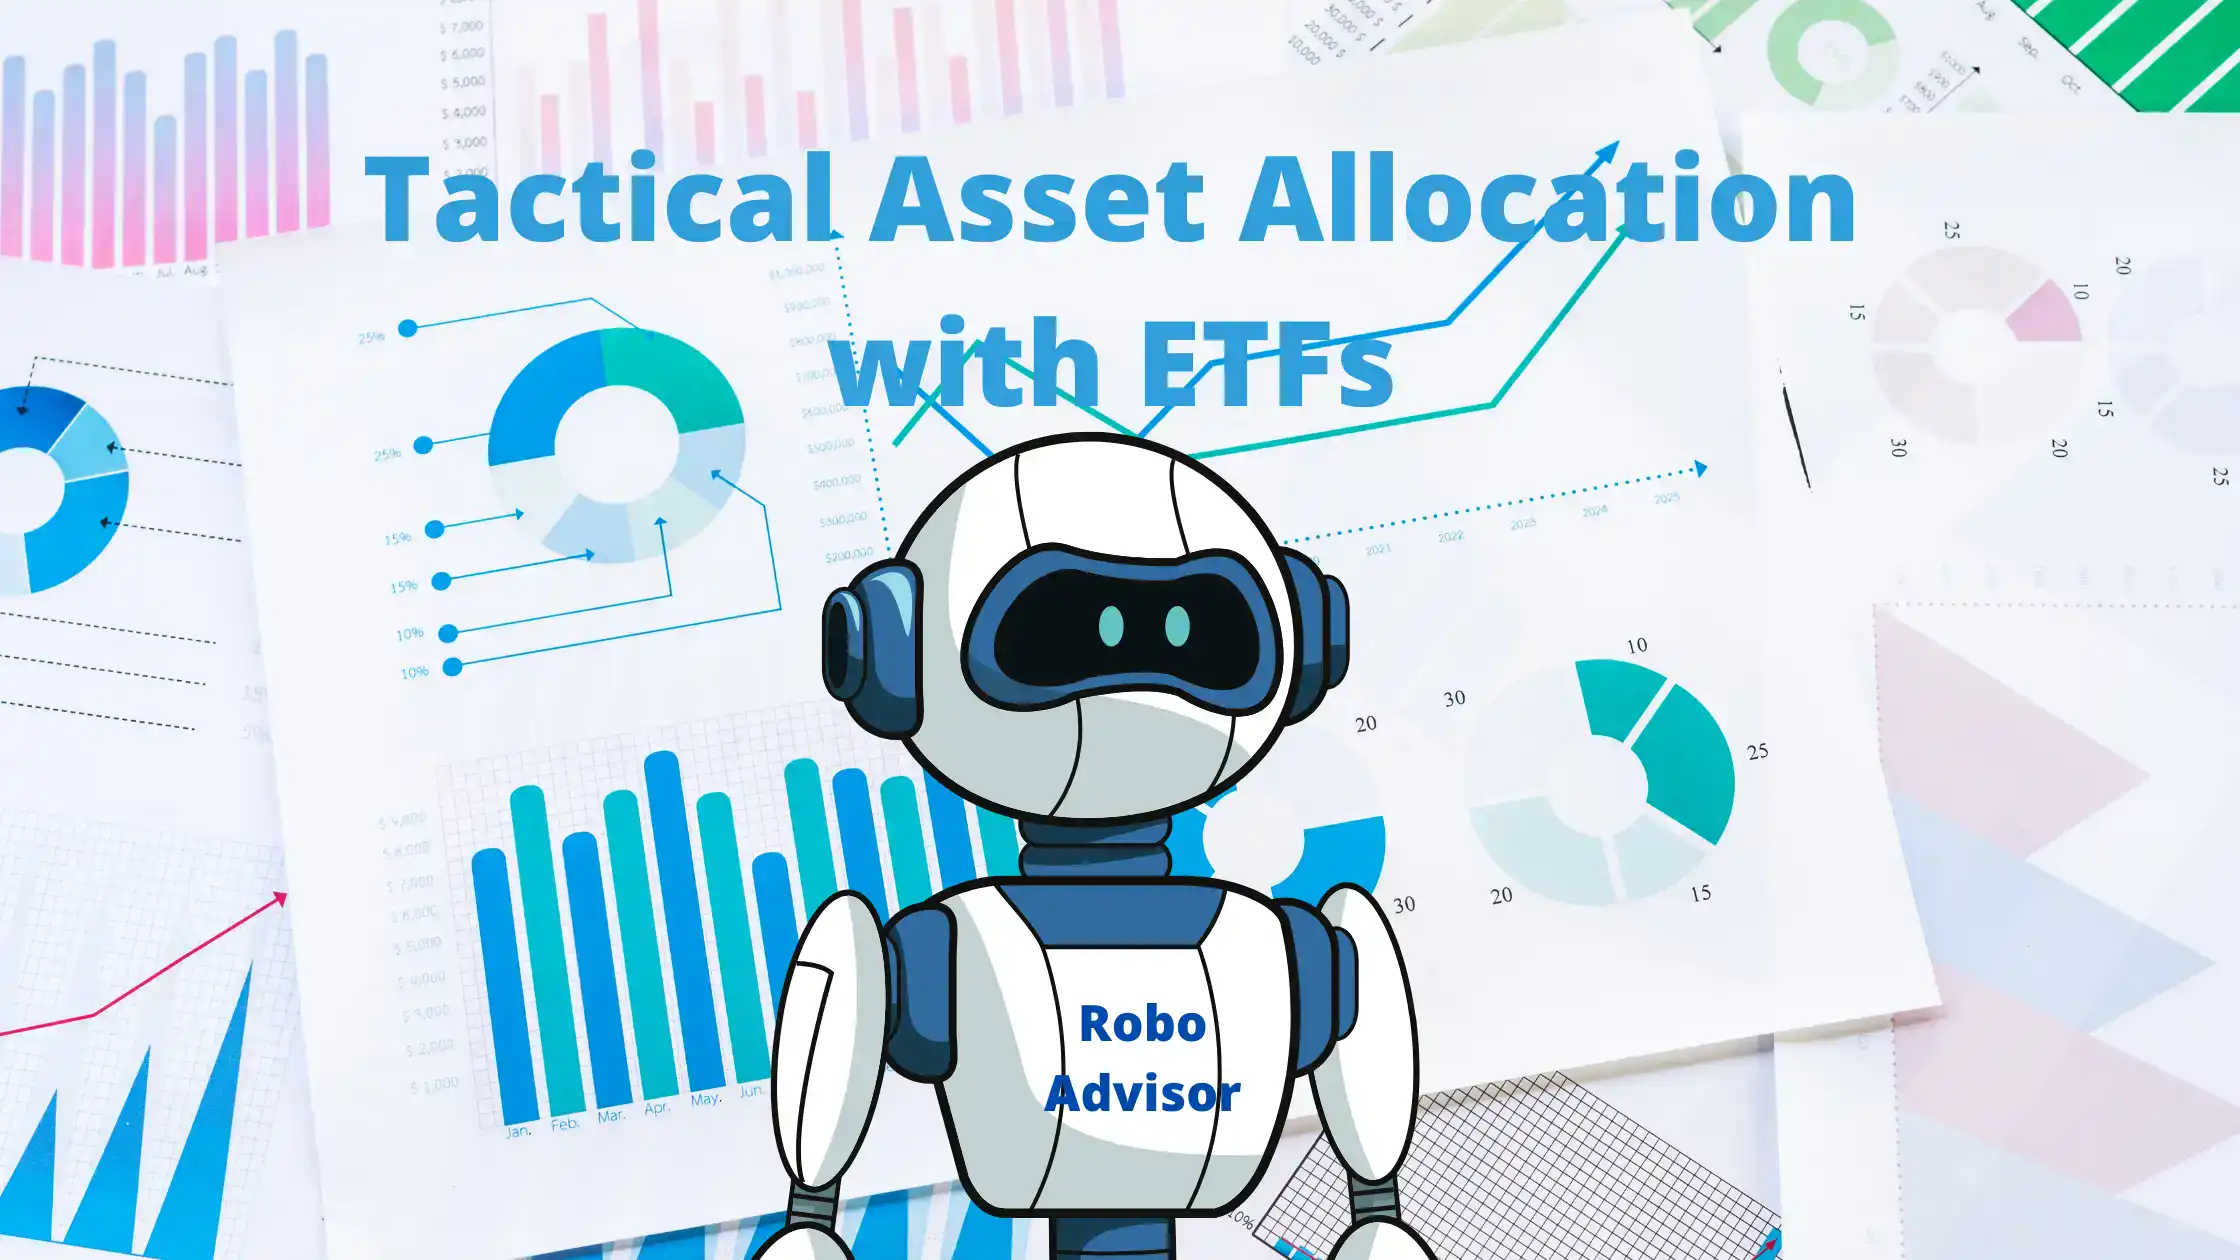 Asset Allocation To Protect and Grow Your Investments